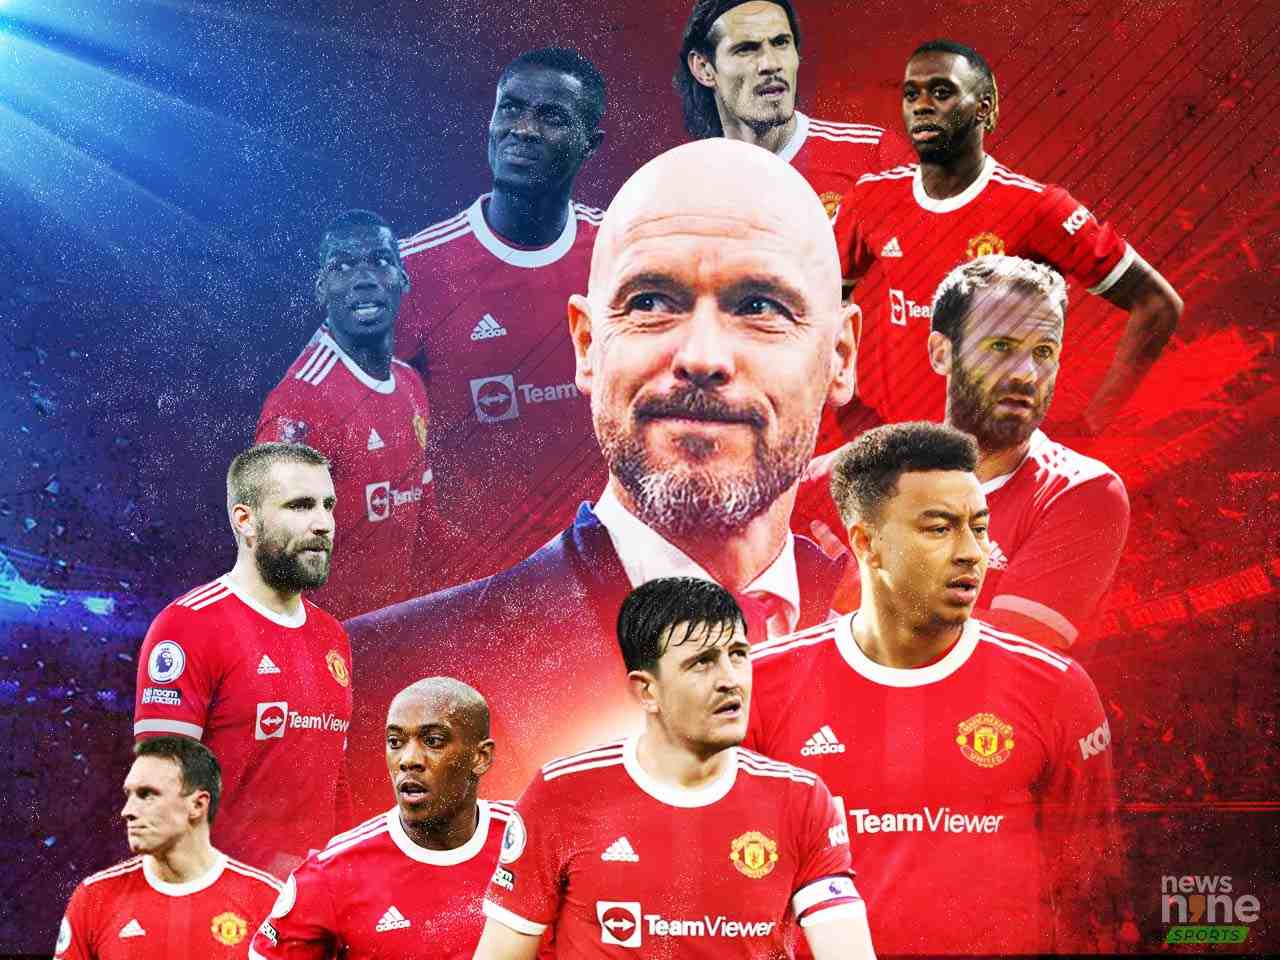 Outgoing XI: Manchester United players likely to be red carded by Erik ten Hag before next season